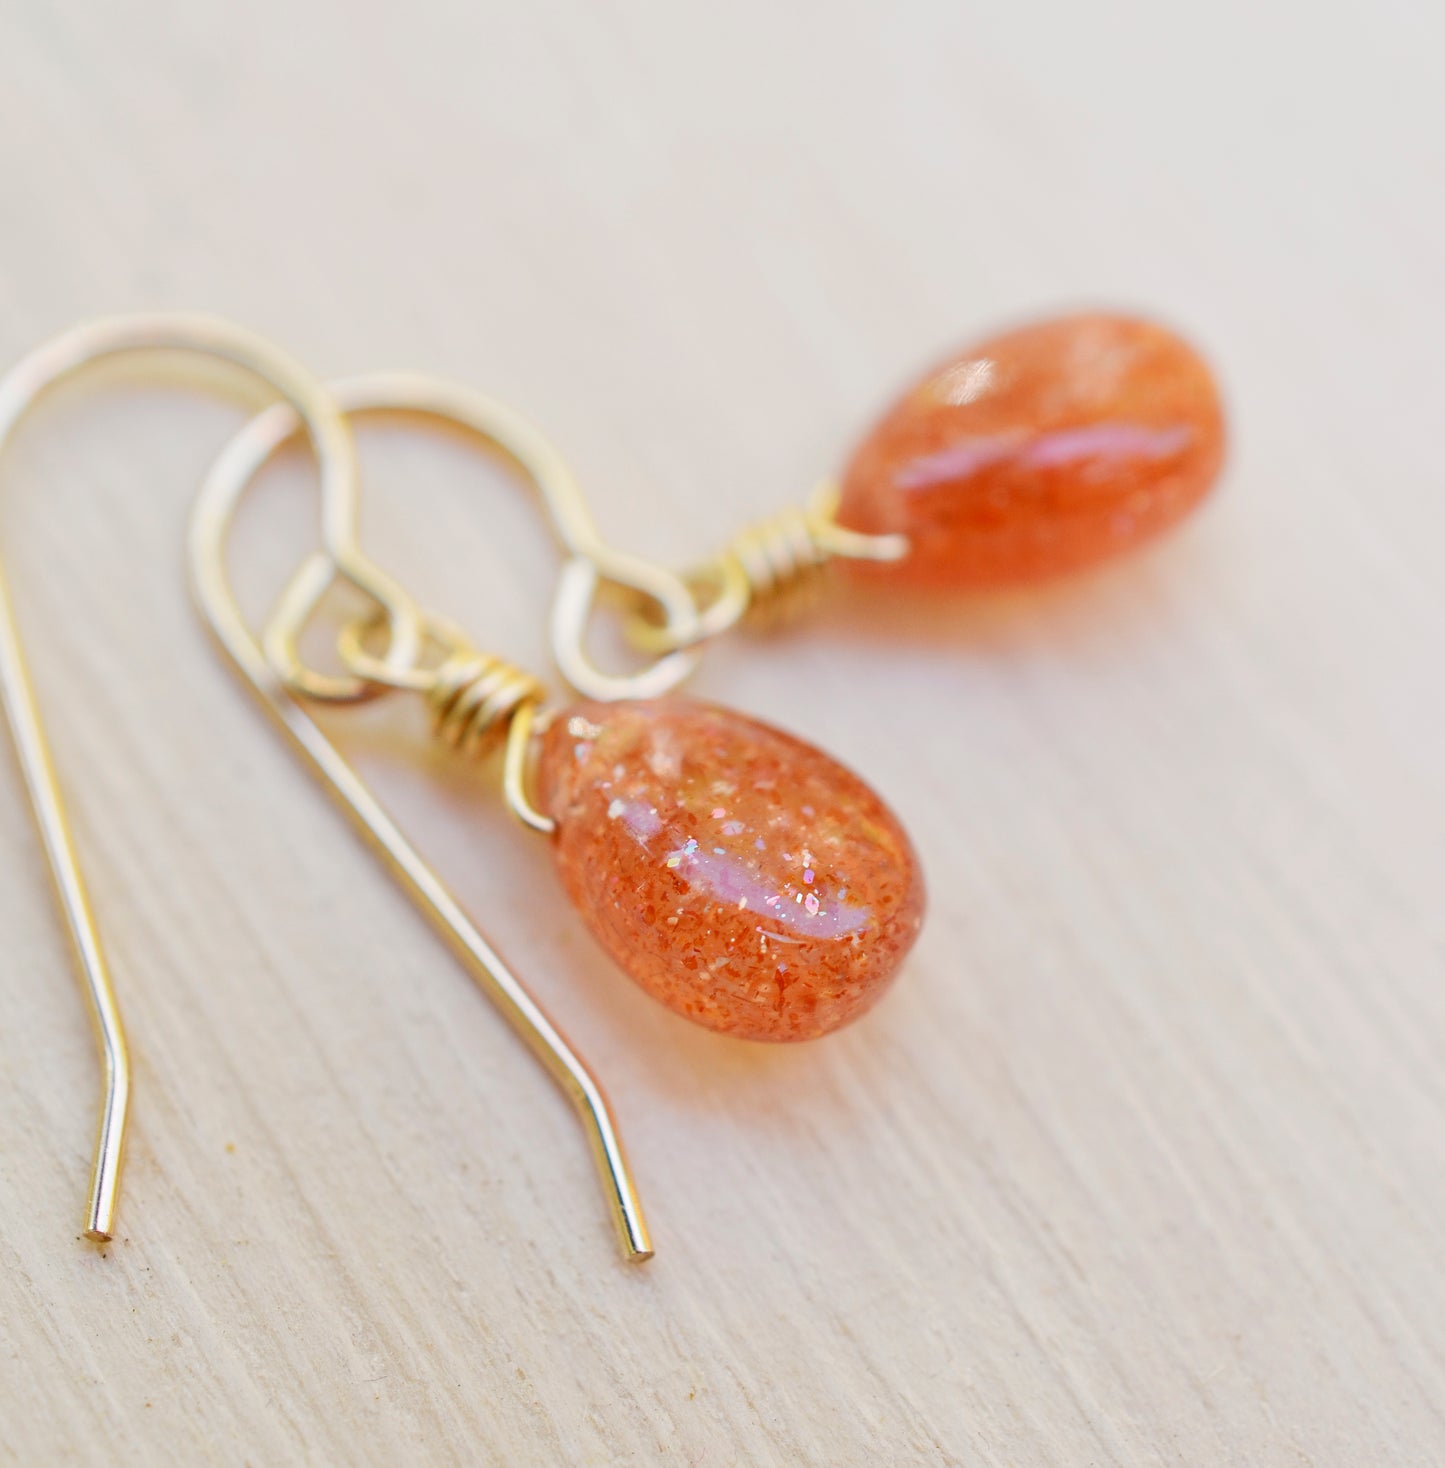 Genuine orange sunstone teardrop dangle earrings shown in 14k gold filled. The gemstones are smooth polished. Close up image showing the shimmer within the stone.